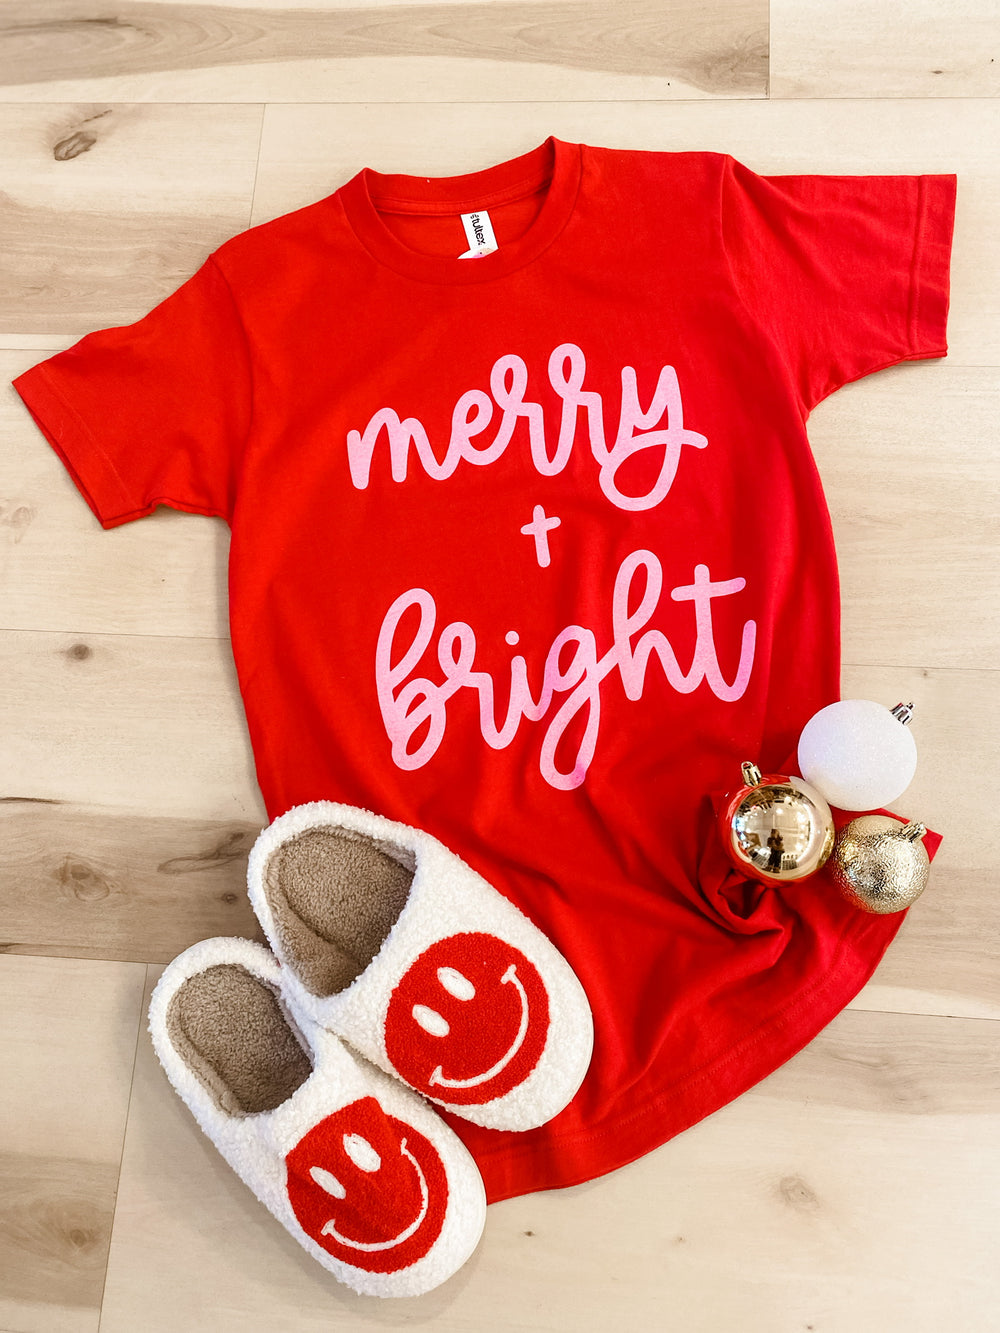 Merry & Bright Tee - The Teal Antler Boutique